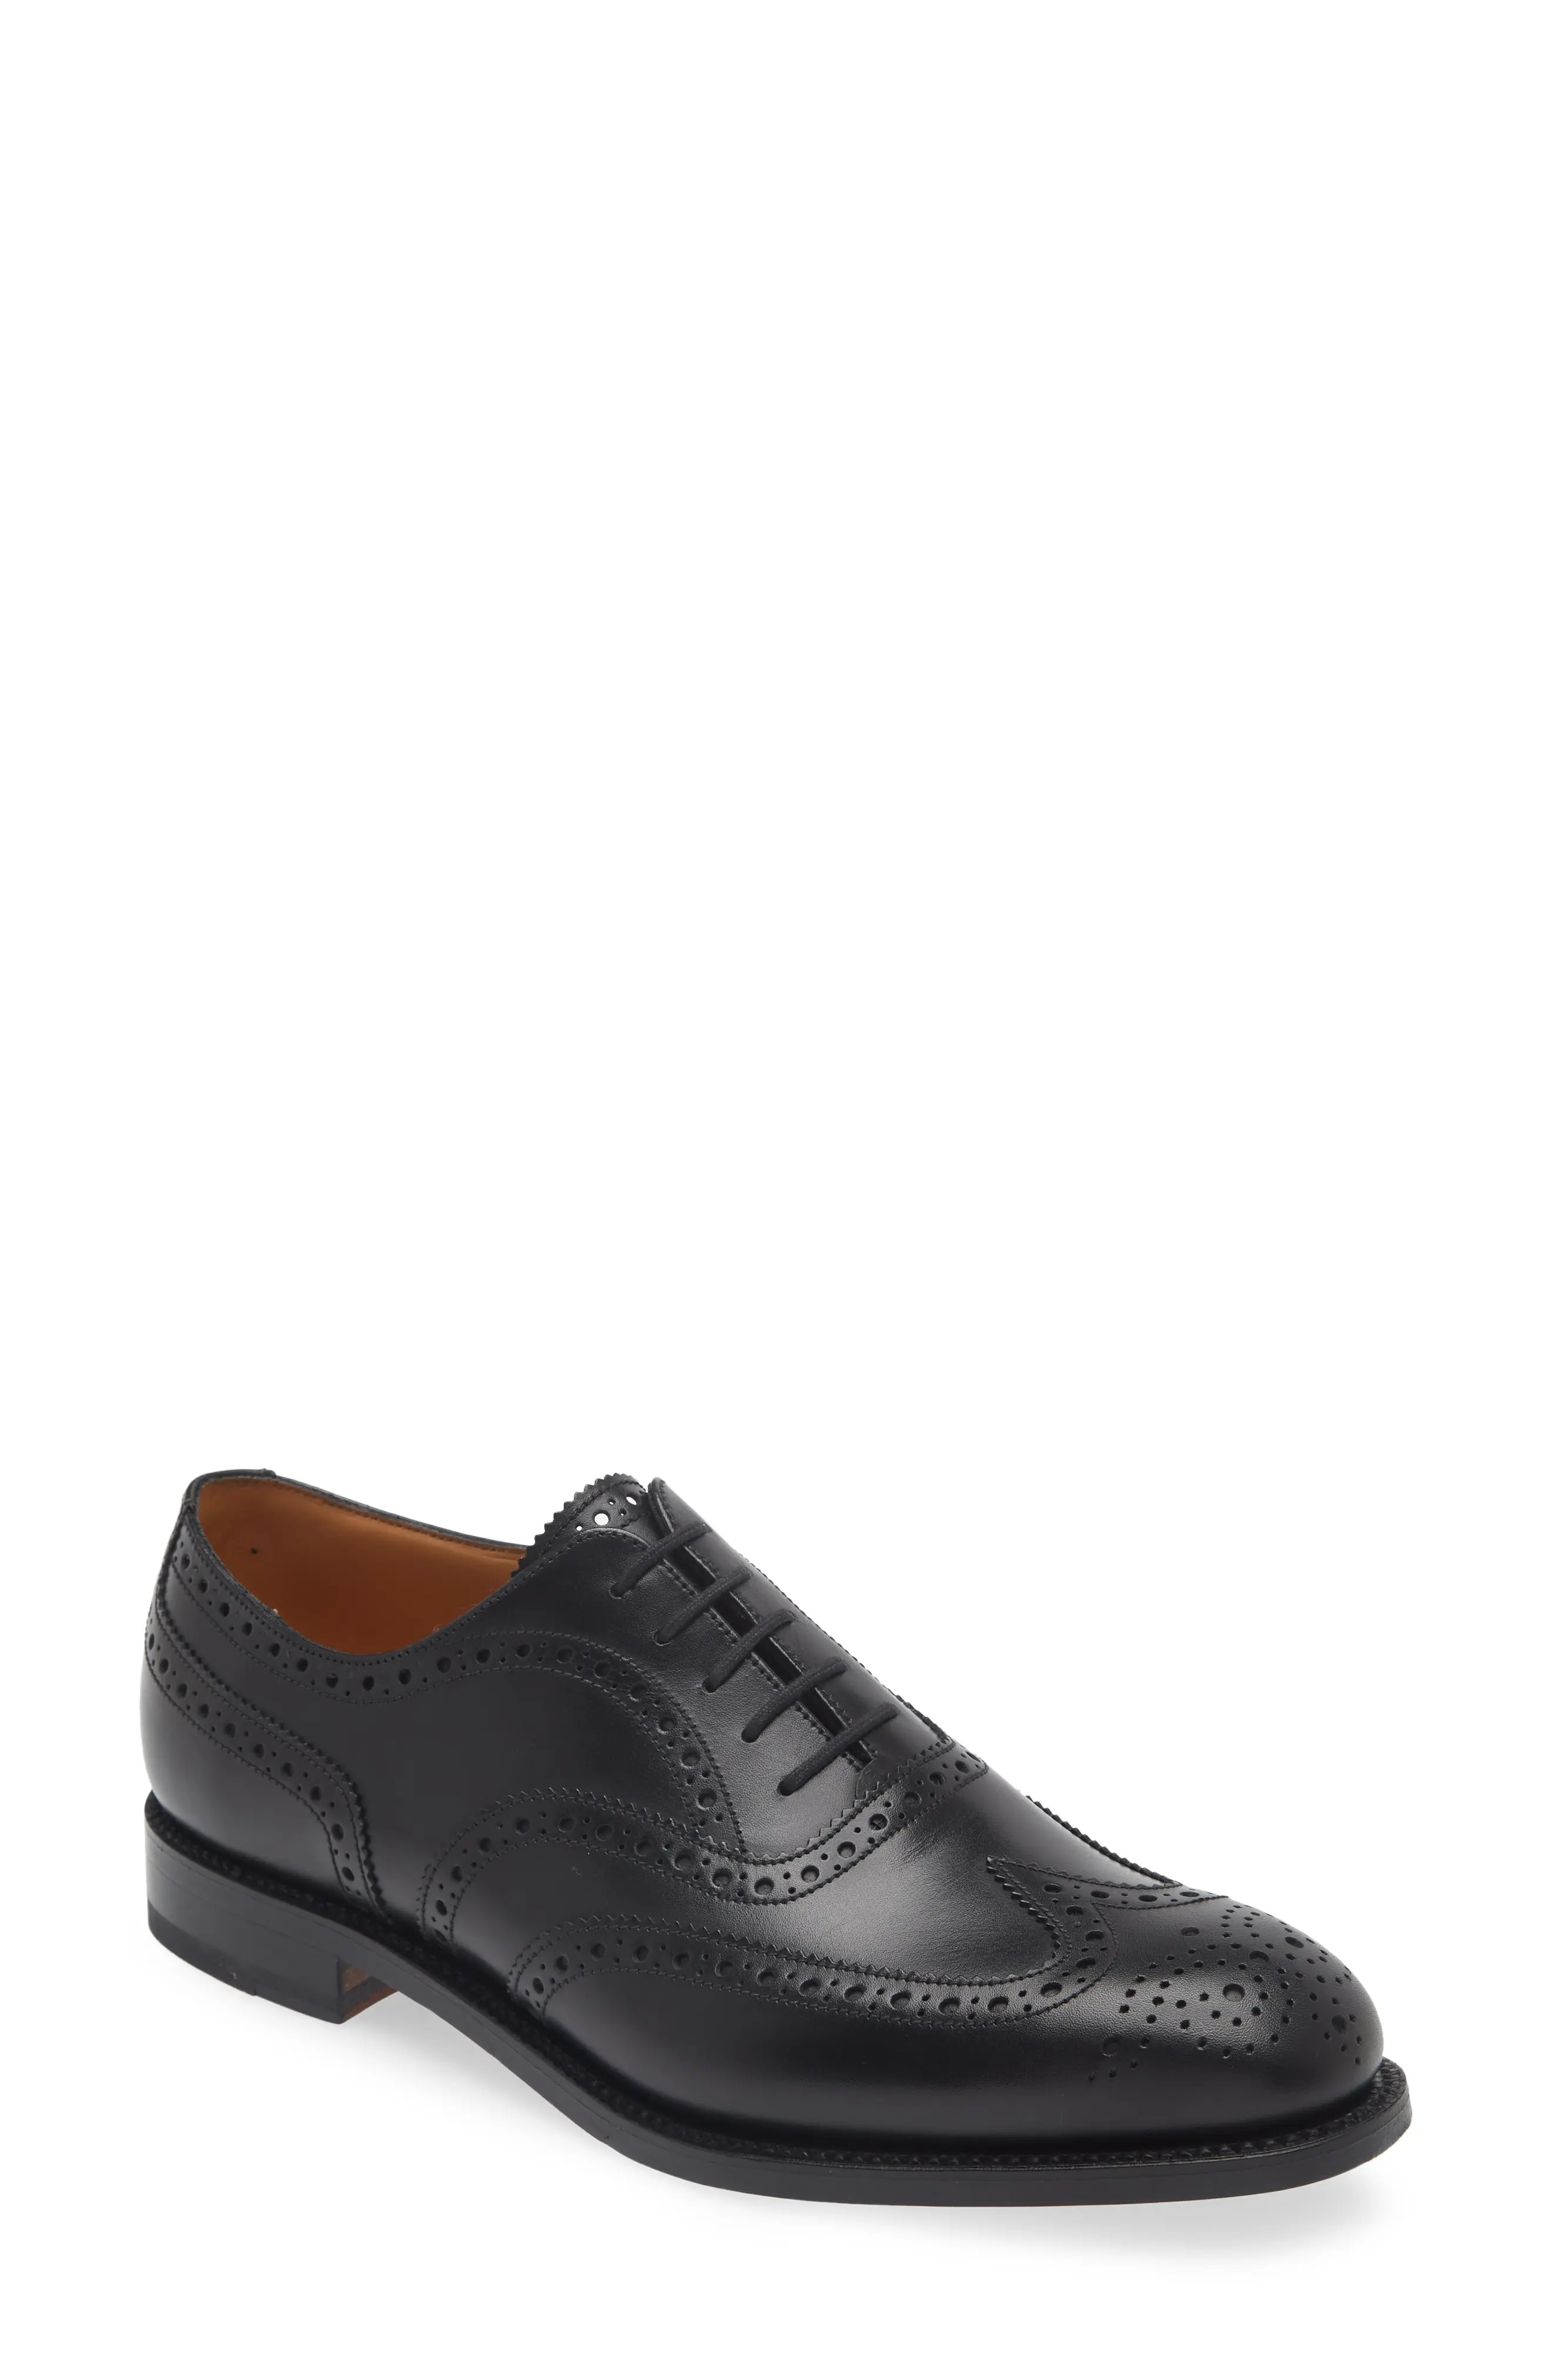 376 Reedition Archive Brogue Oxford - 1